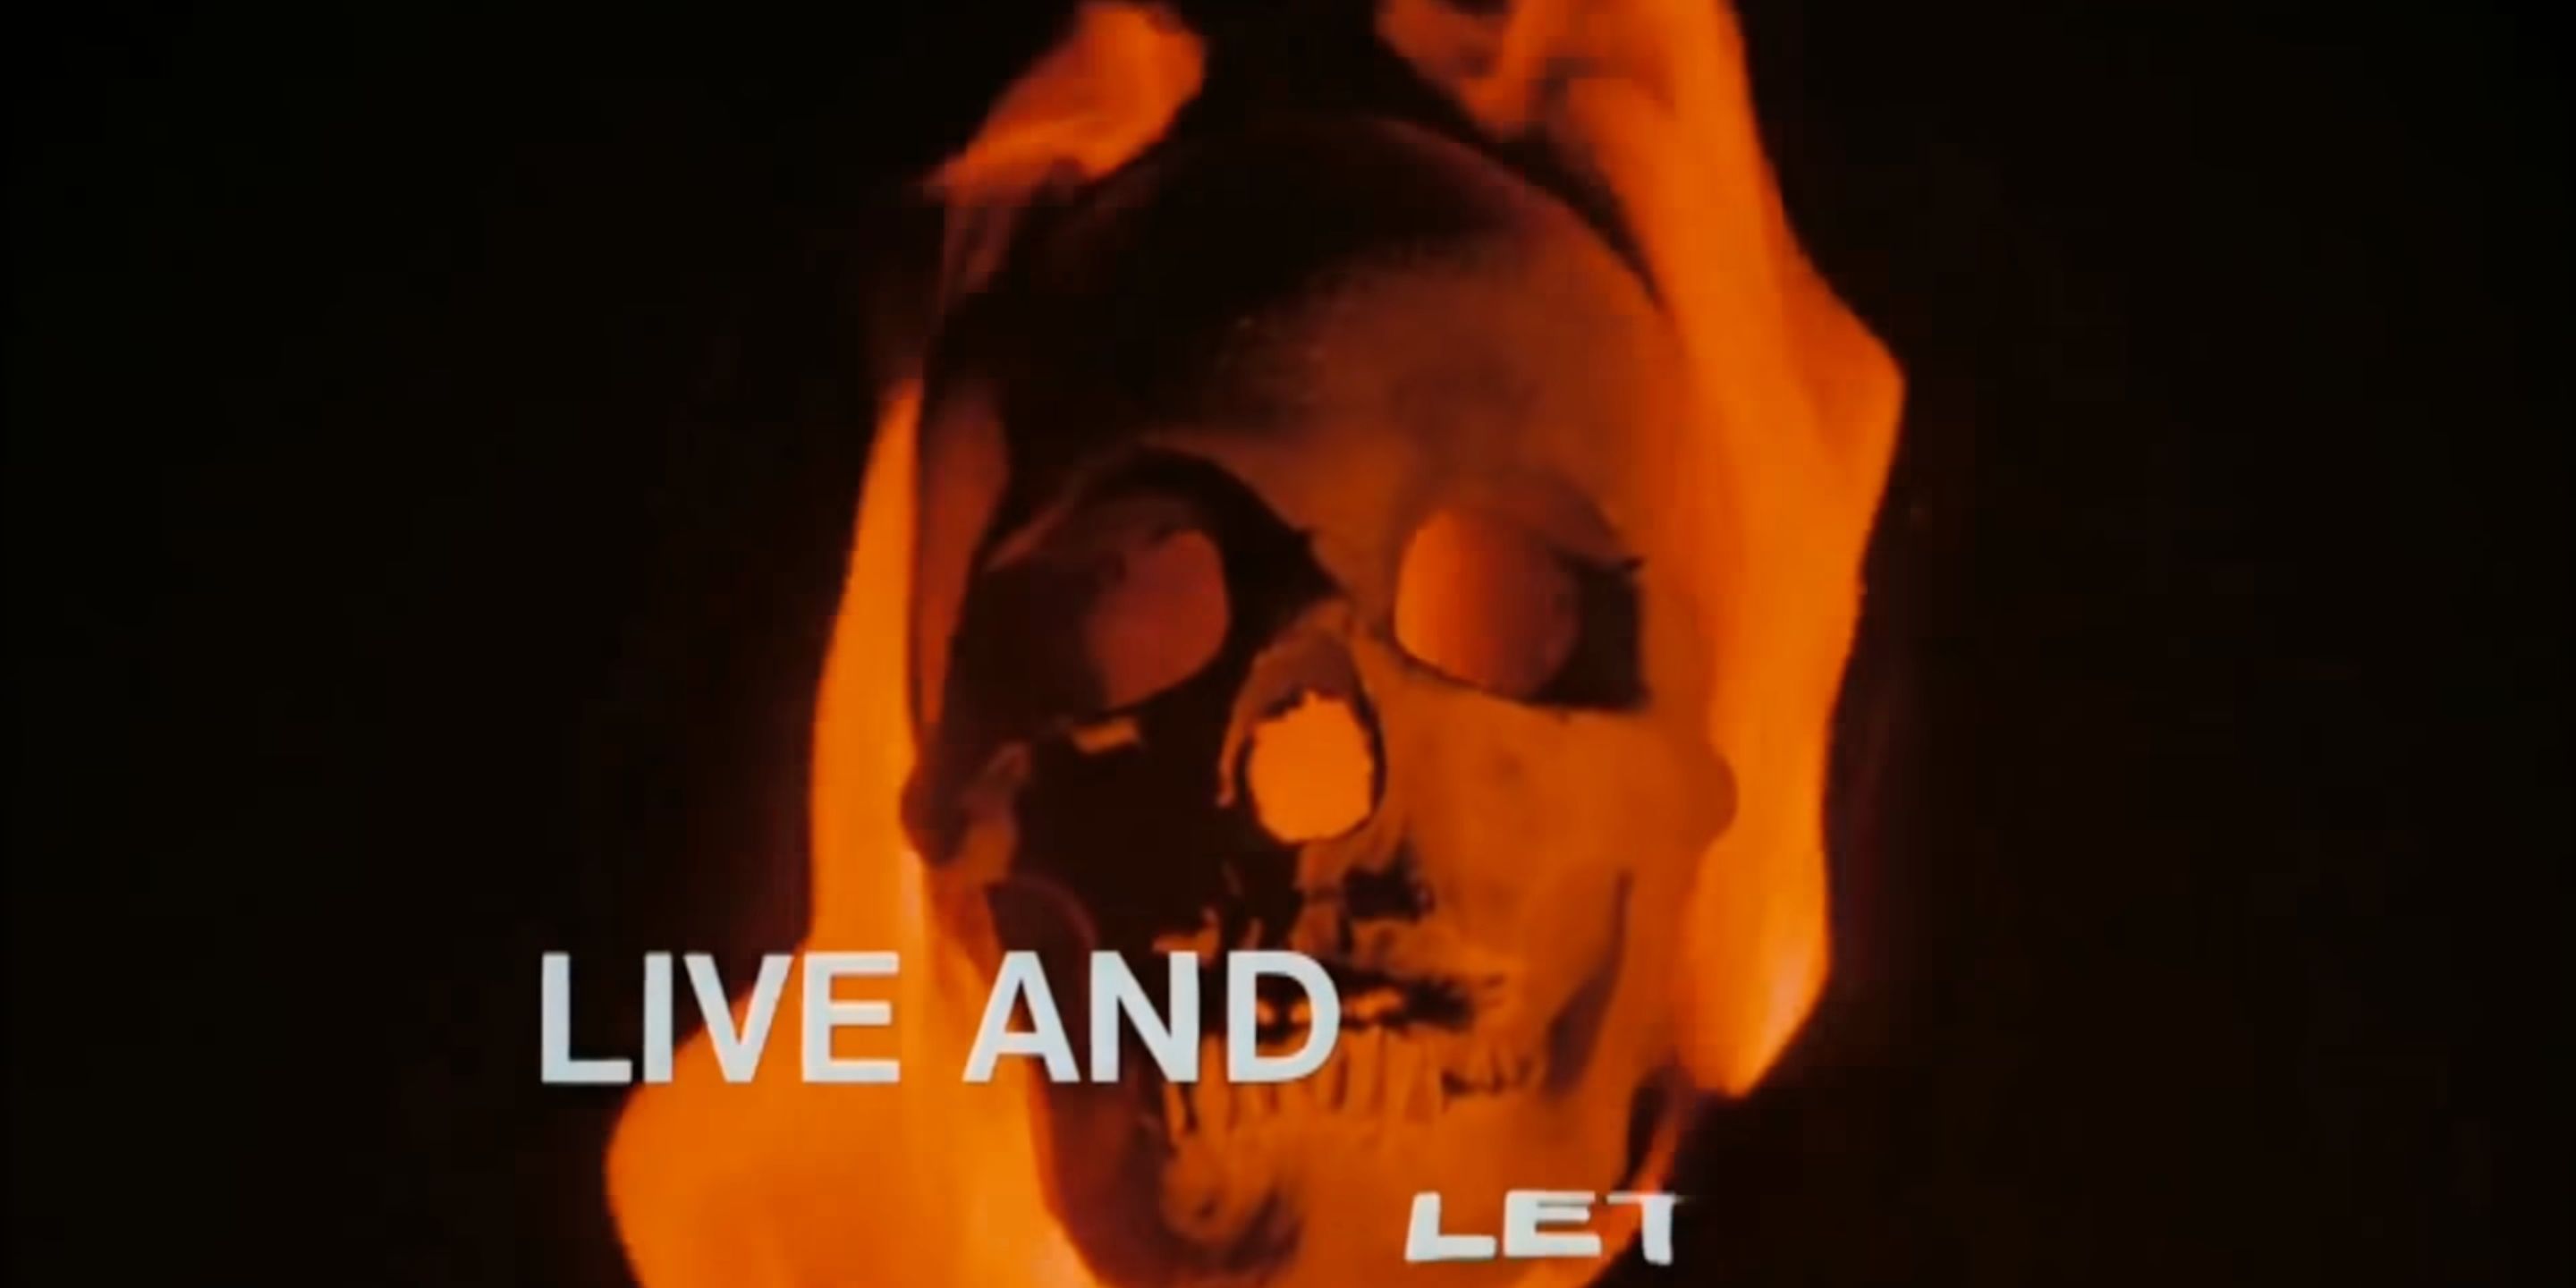 A skull on fire in the opening credits sequence of 'Live and Let Die'.